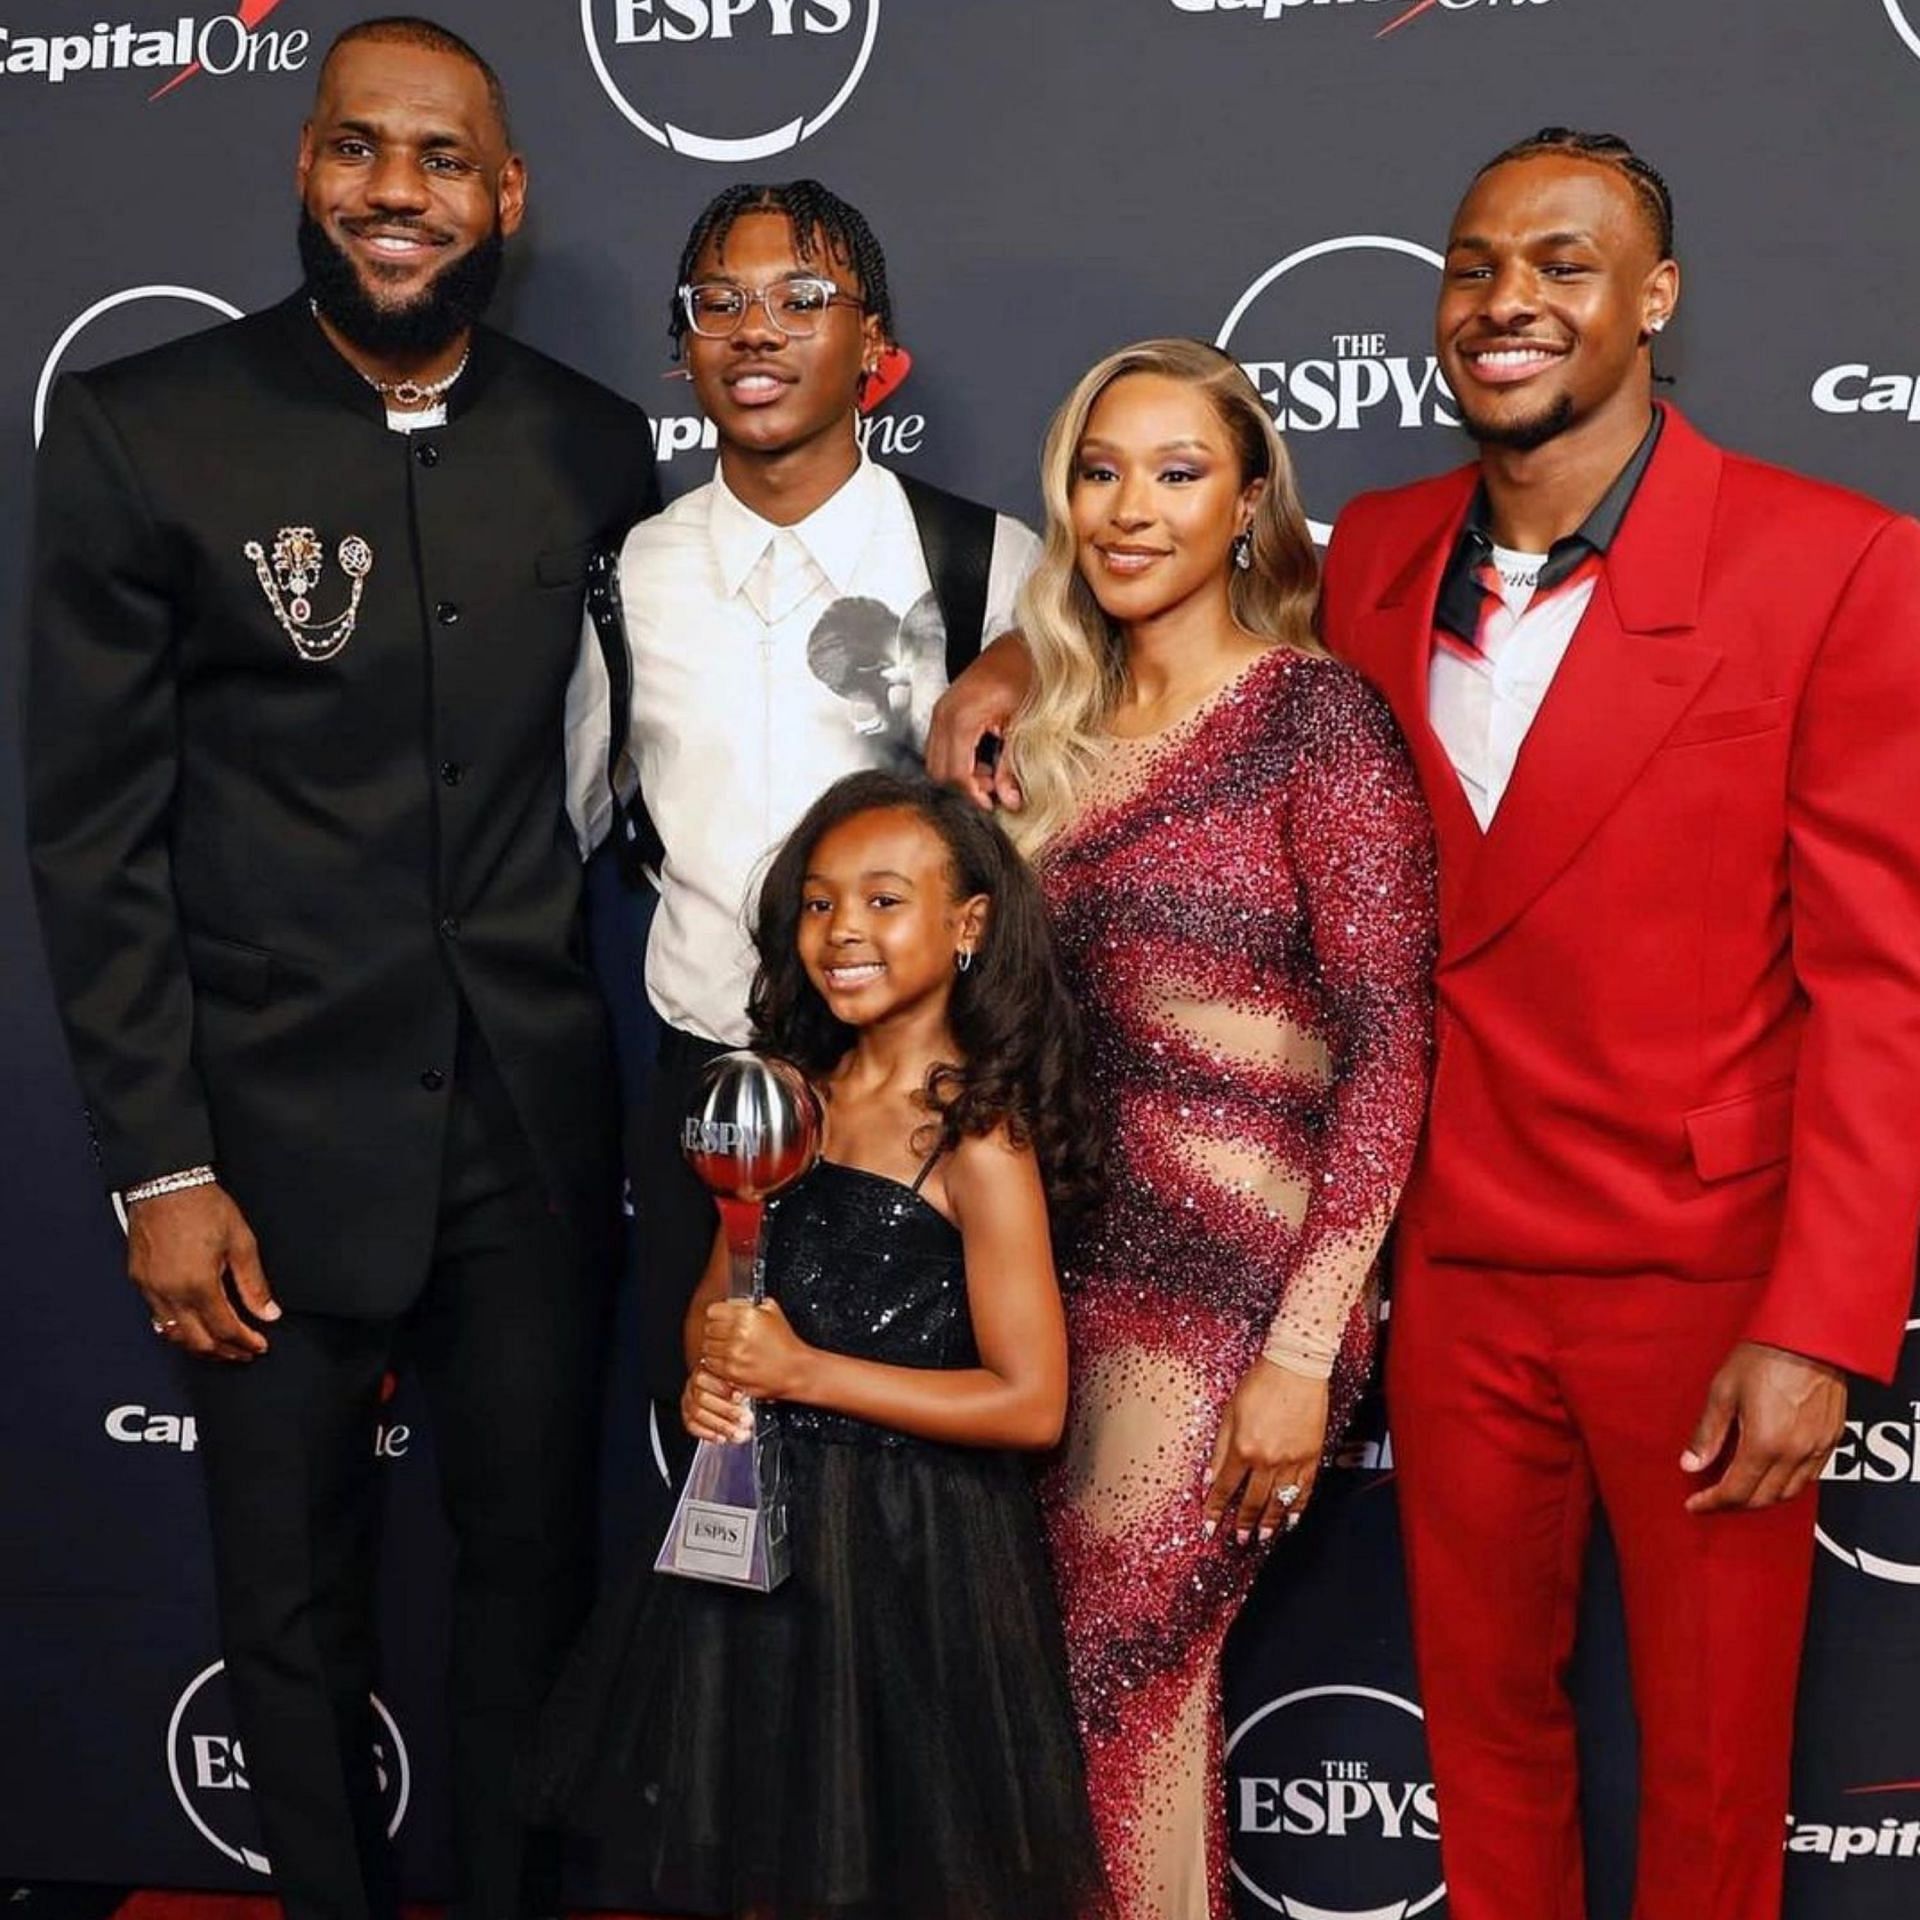 The James Gang: LeBron with his family (via Instagram)